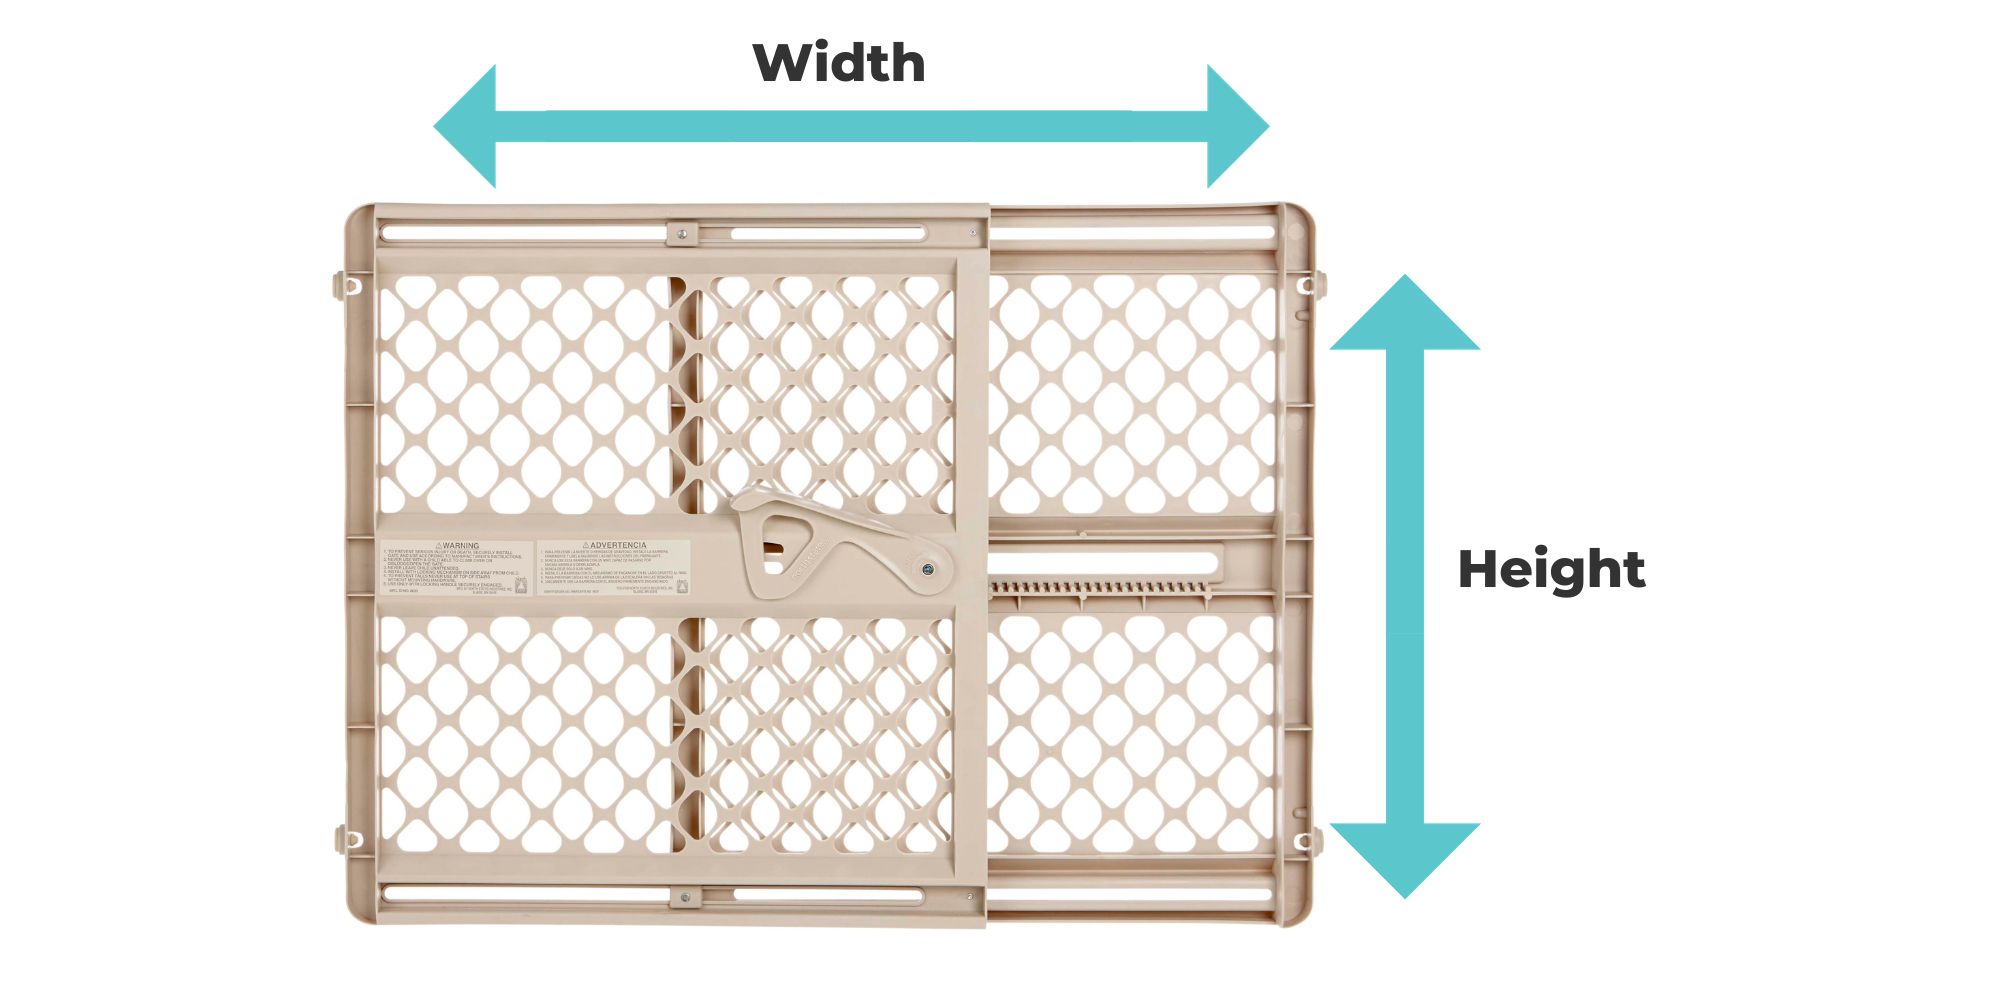 Tan Baby gate with arrows pointing out the width at the top and height on the side